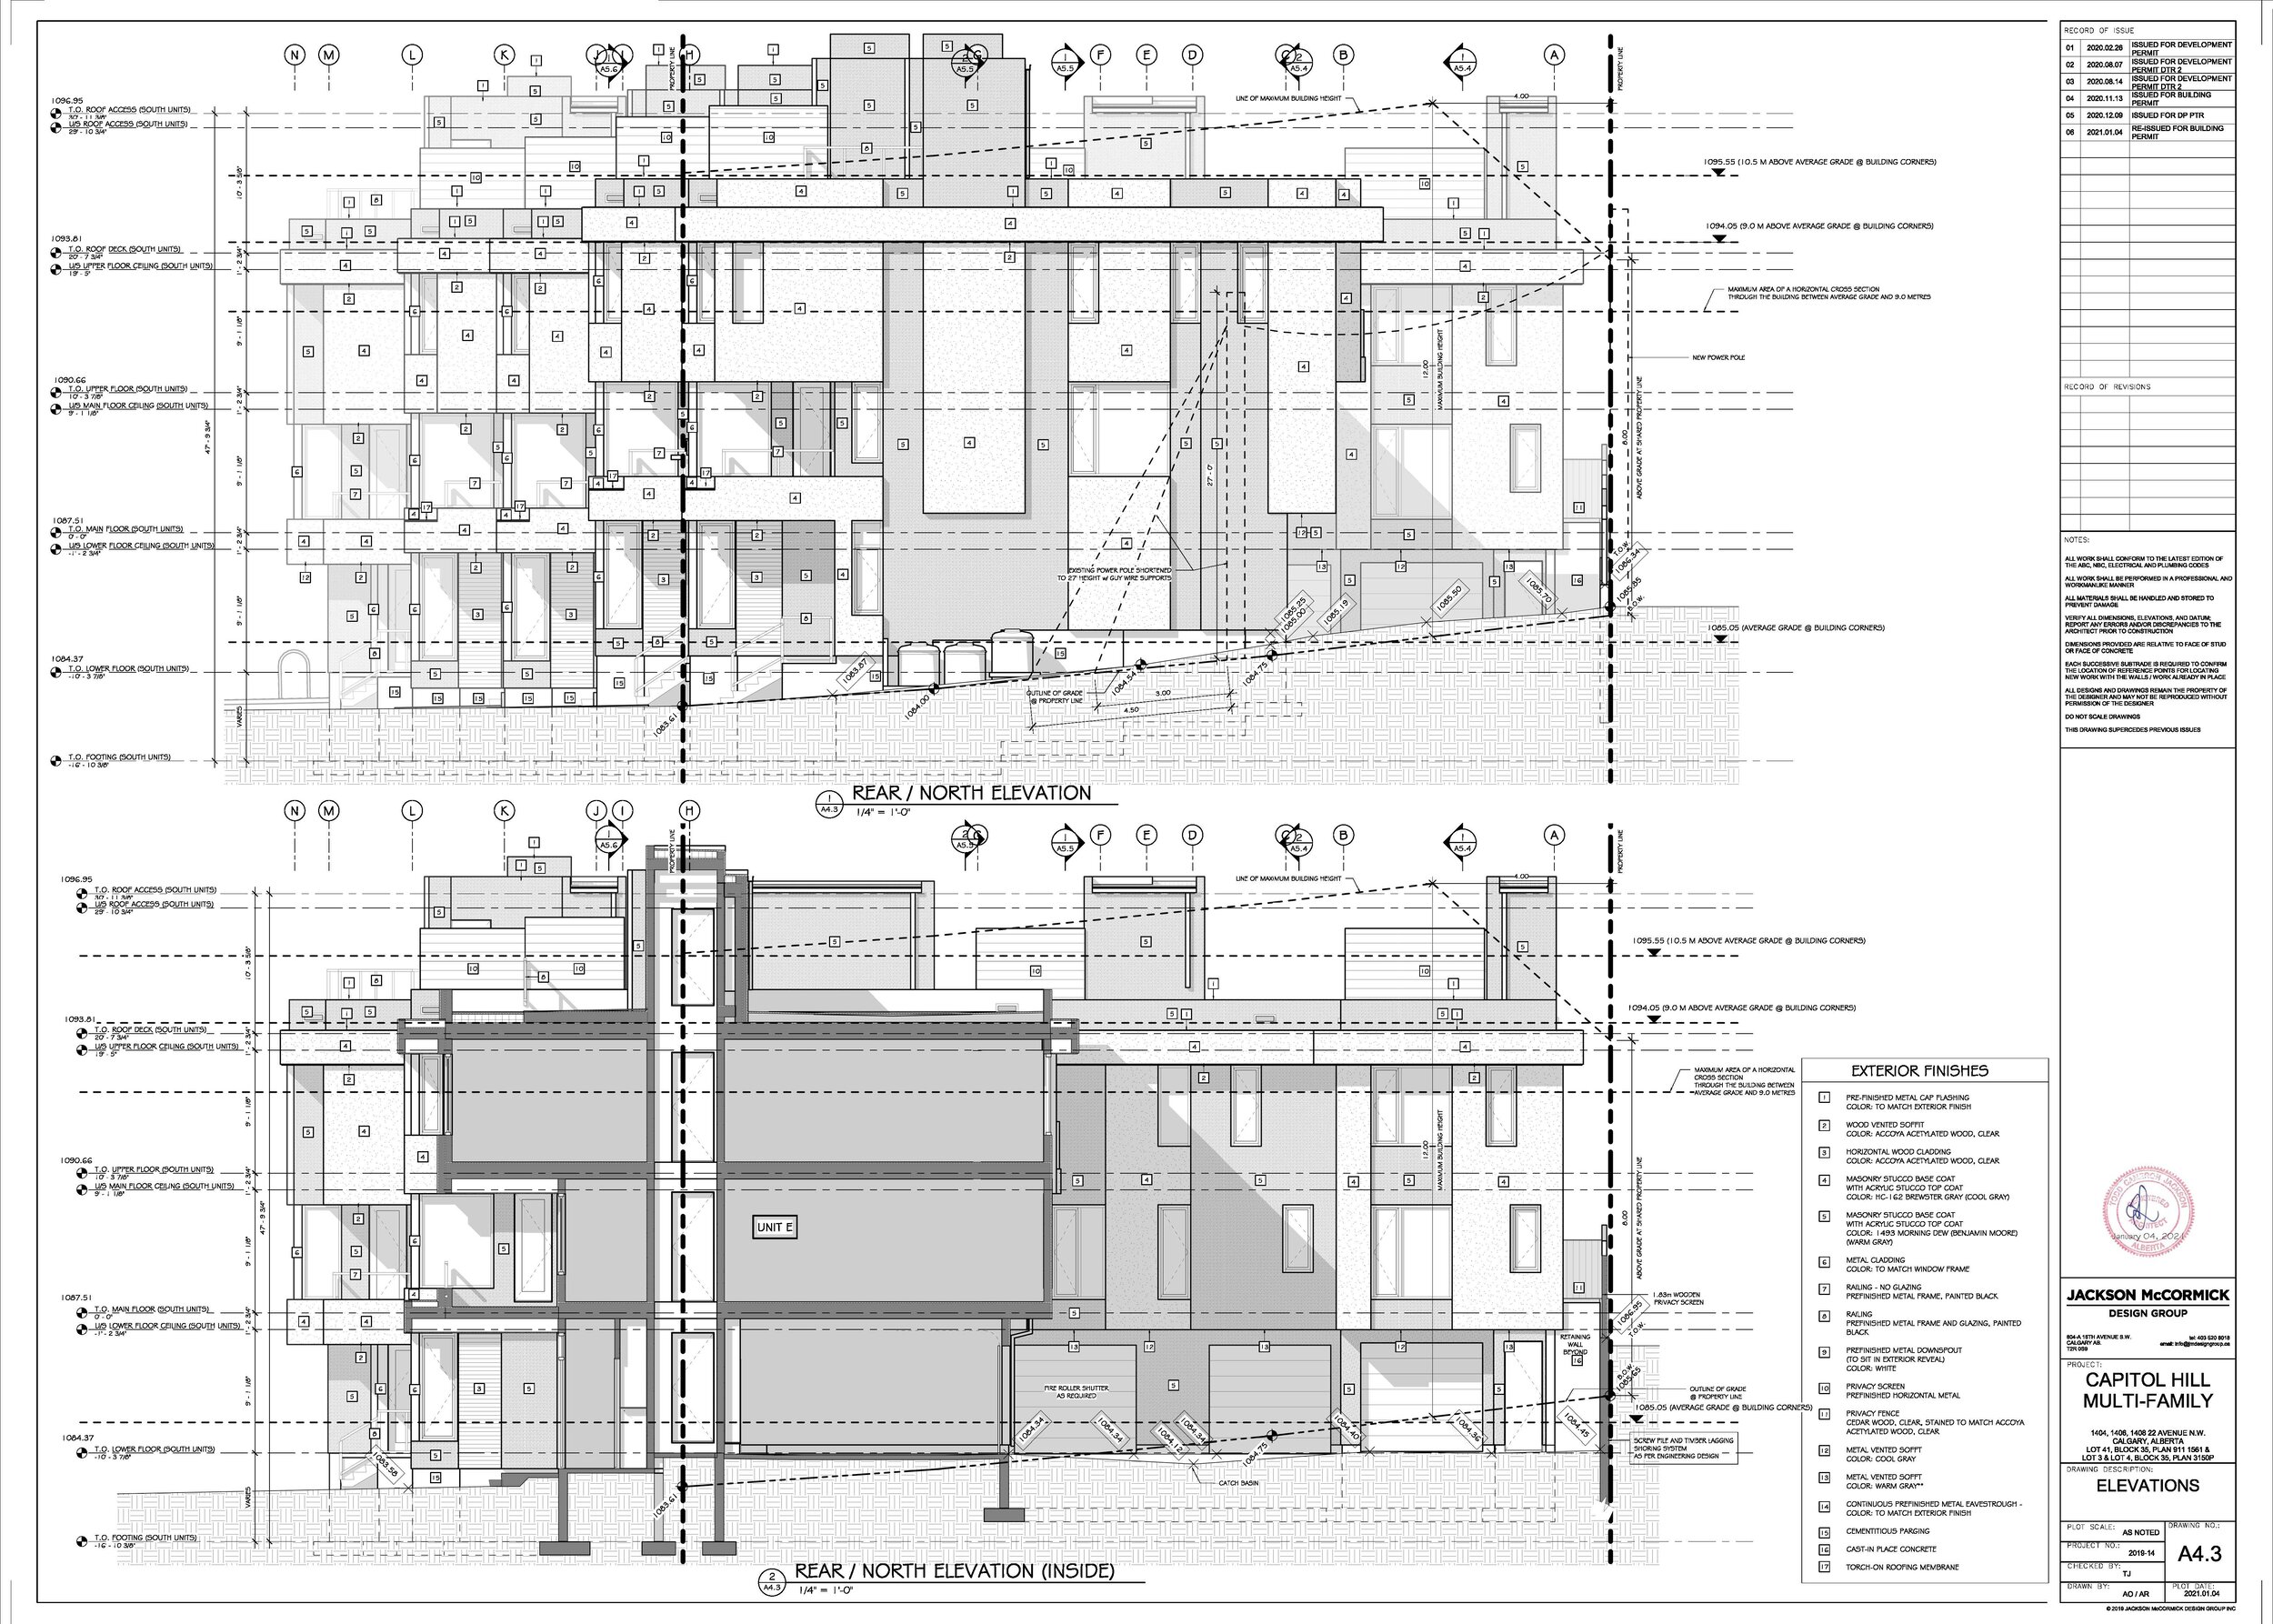 2021.01.04 - CAPITOL HILL MULTI-FAMILY - ARCH BP DRAWINGS_Page_16.jpg